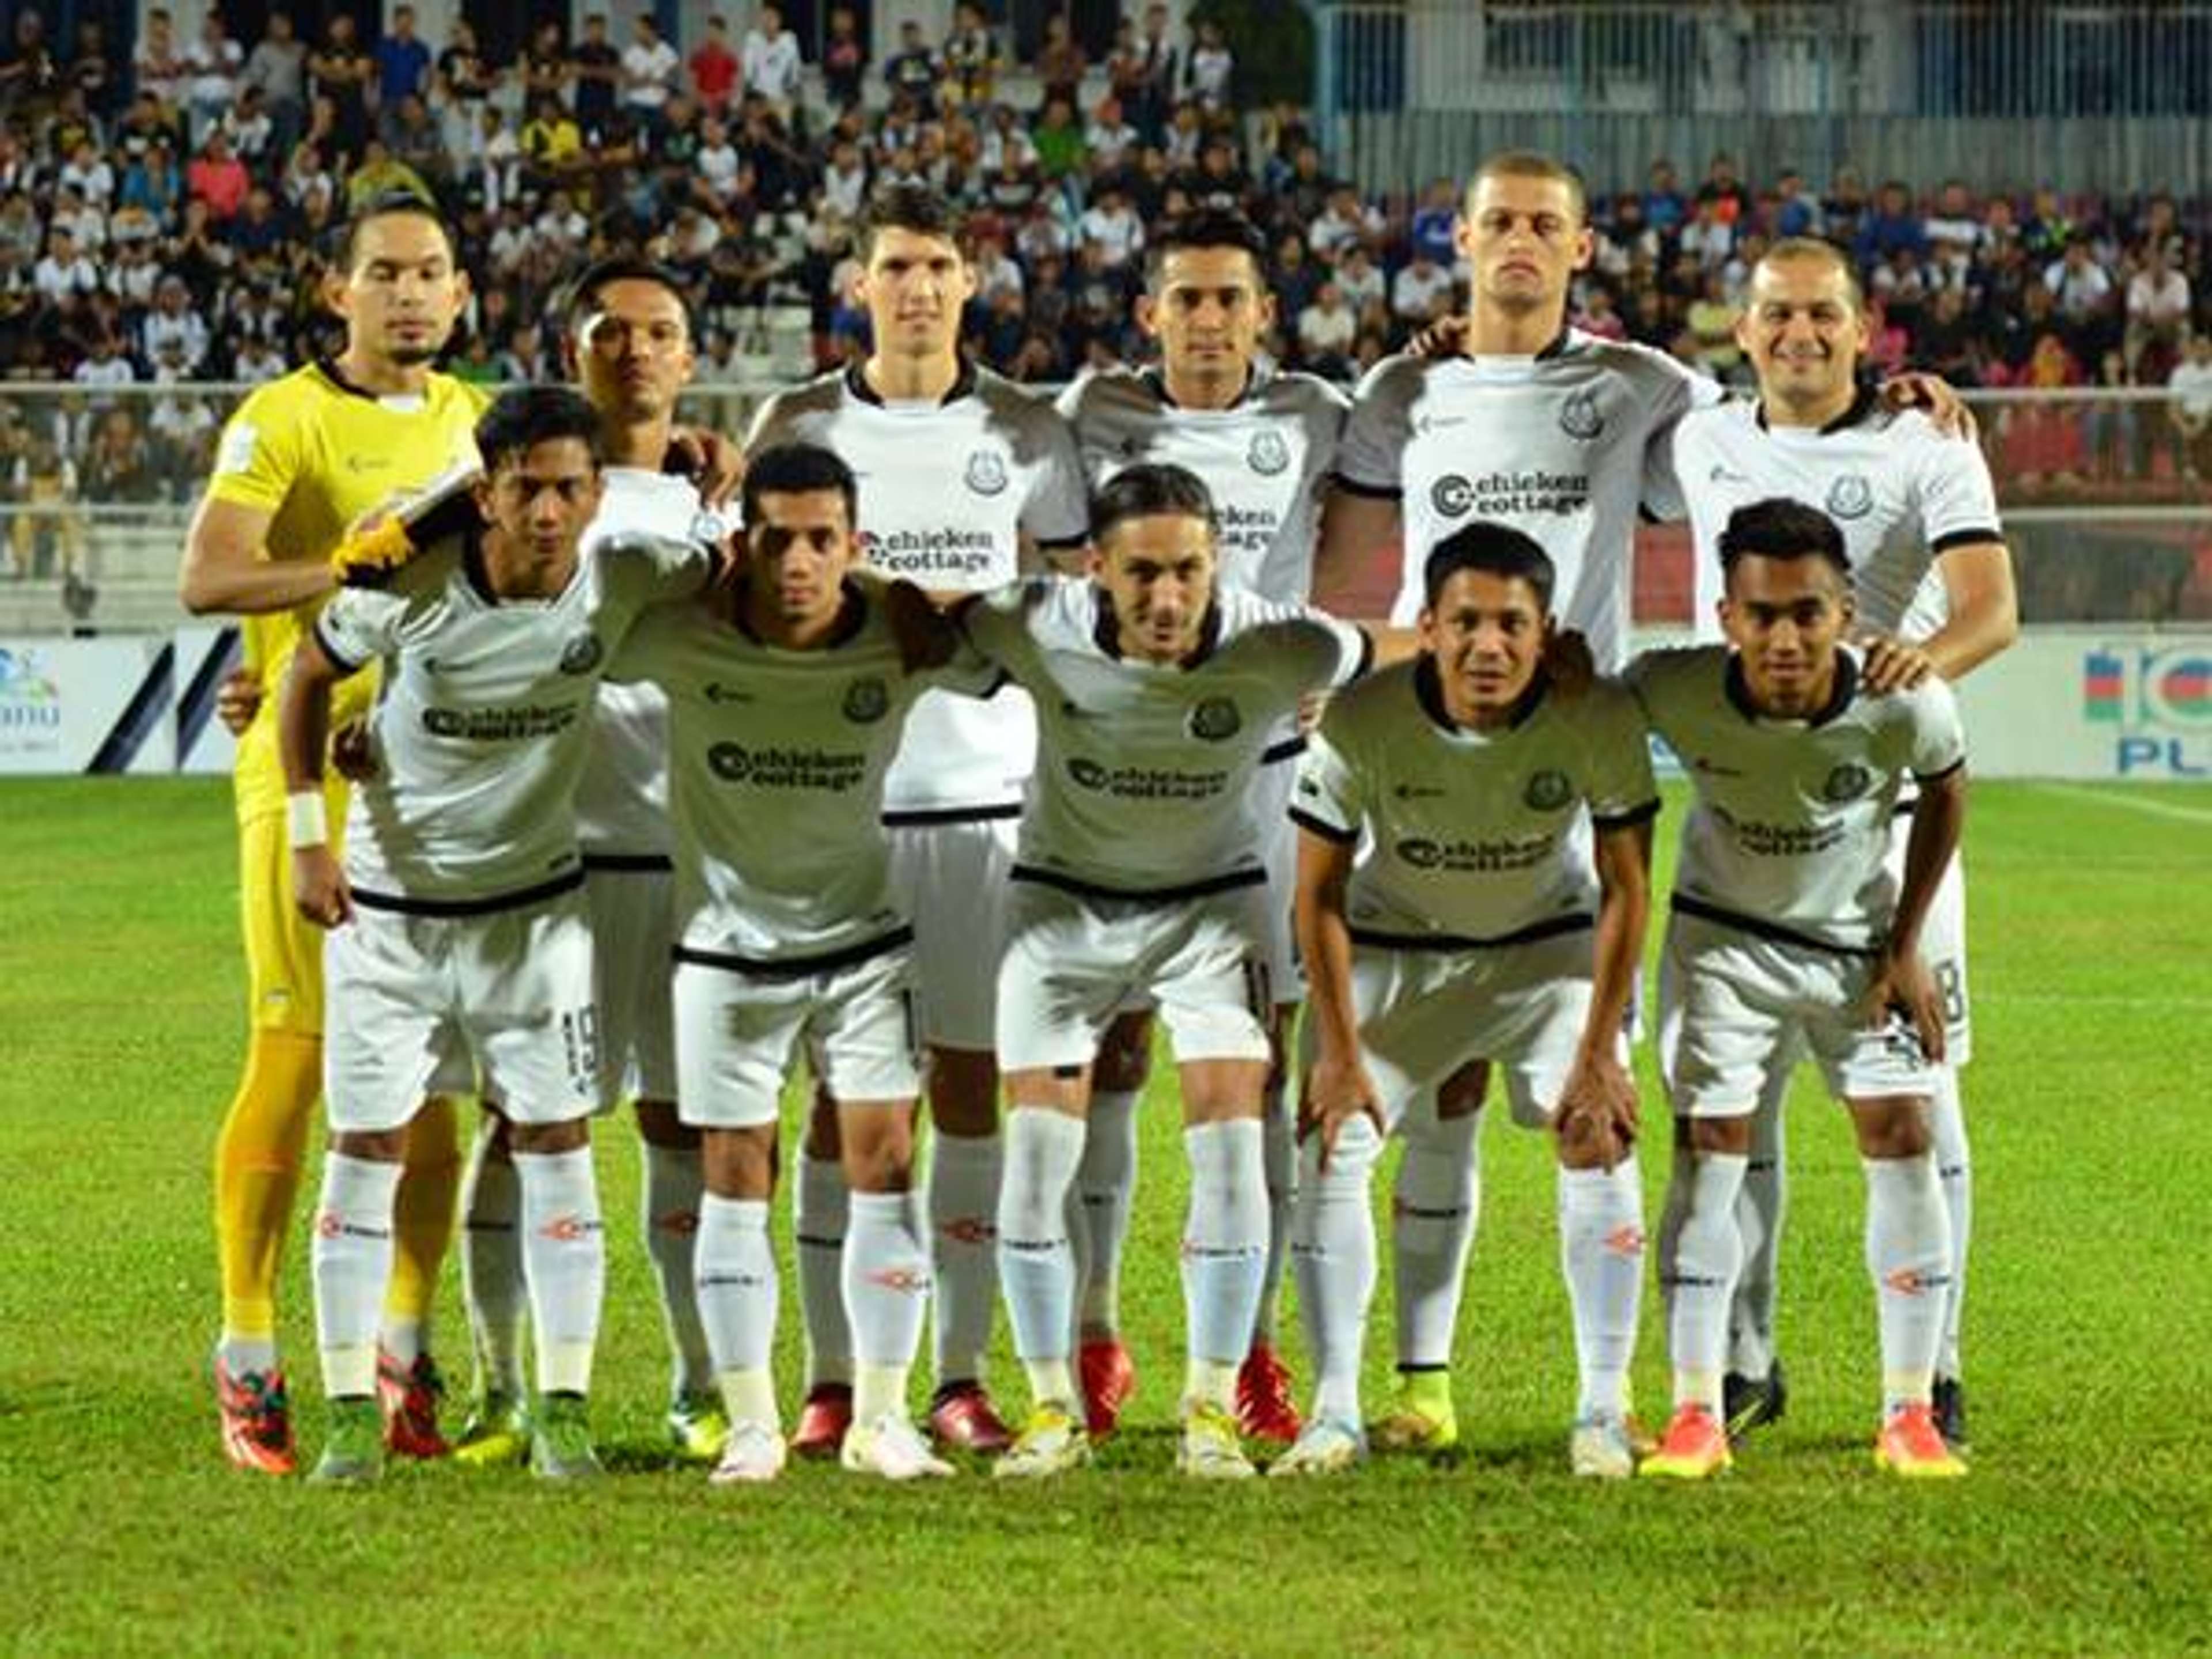 Terengganu first eleven against PDRM 27/1/2017